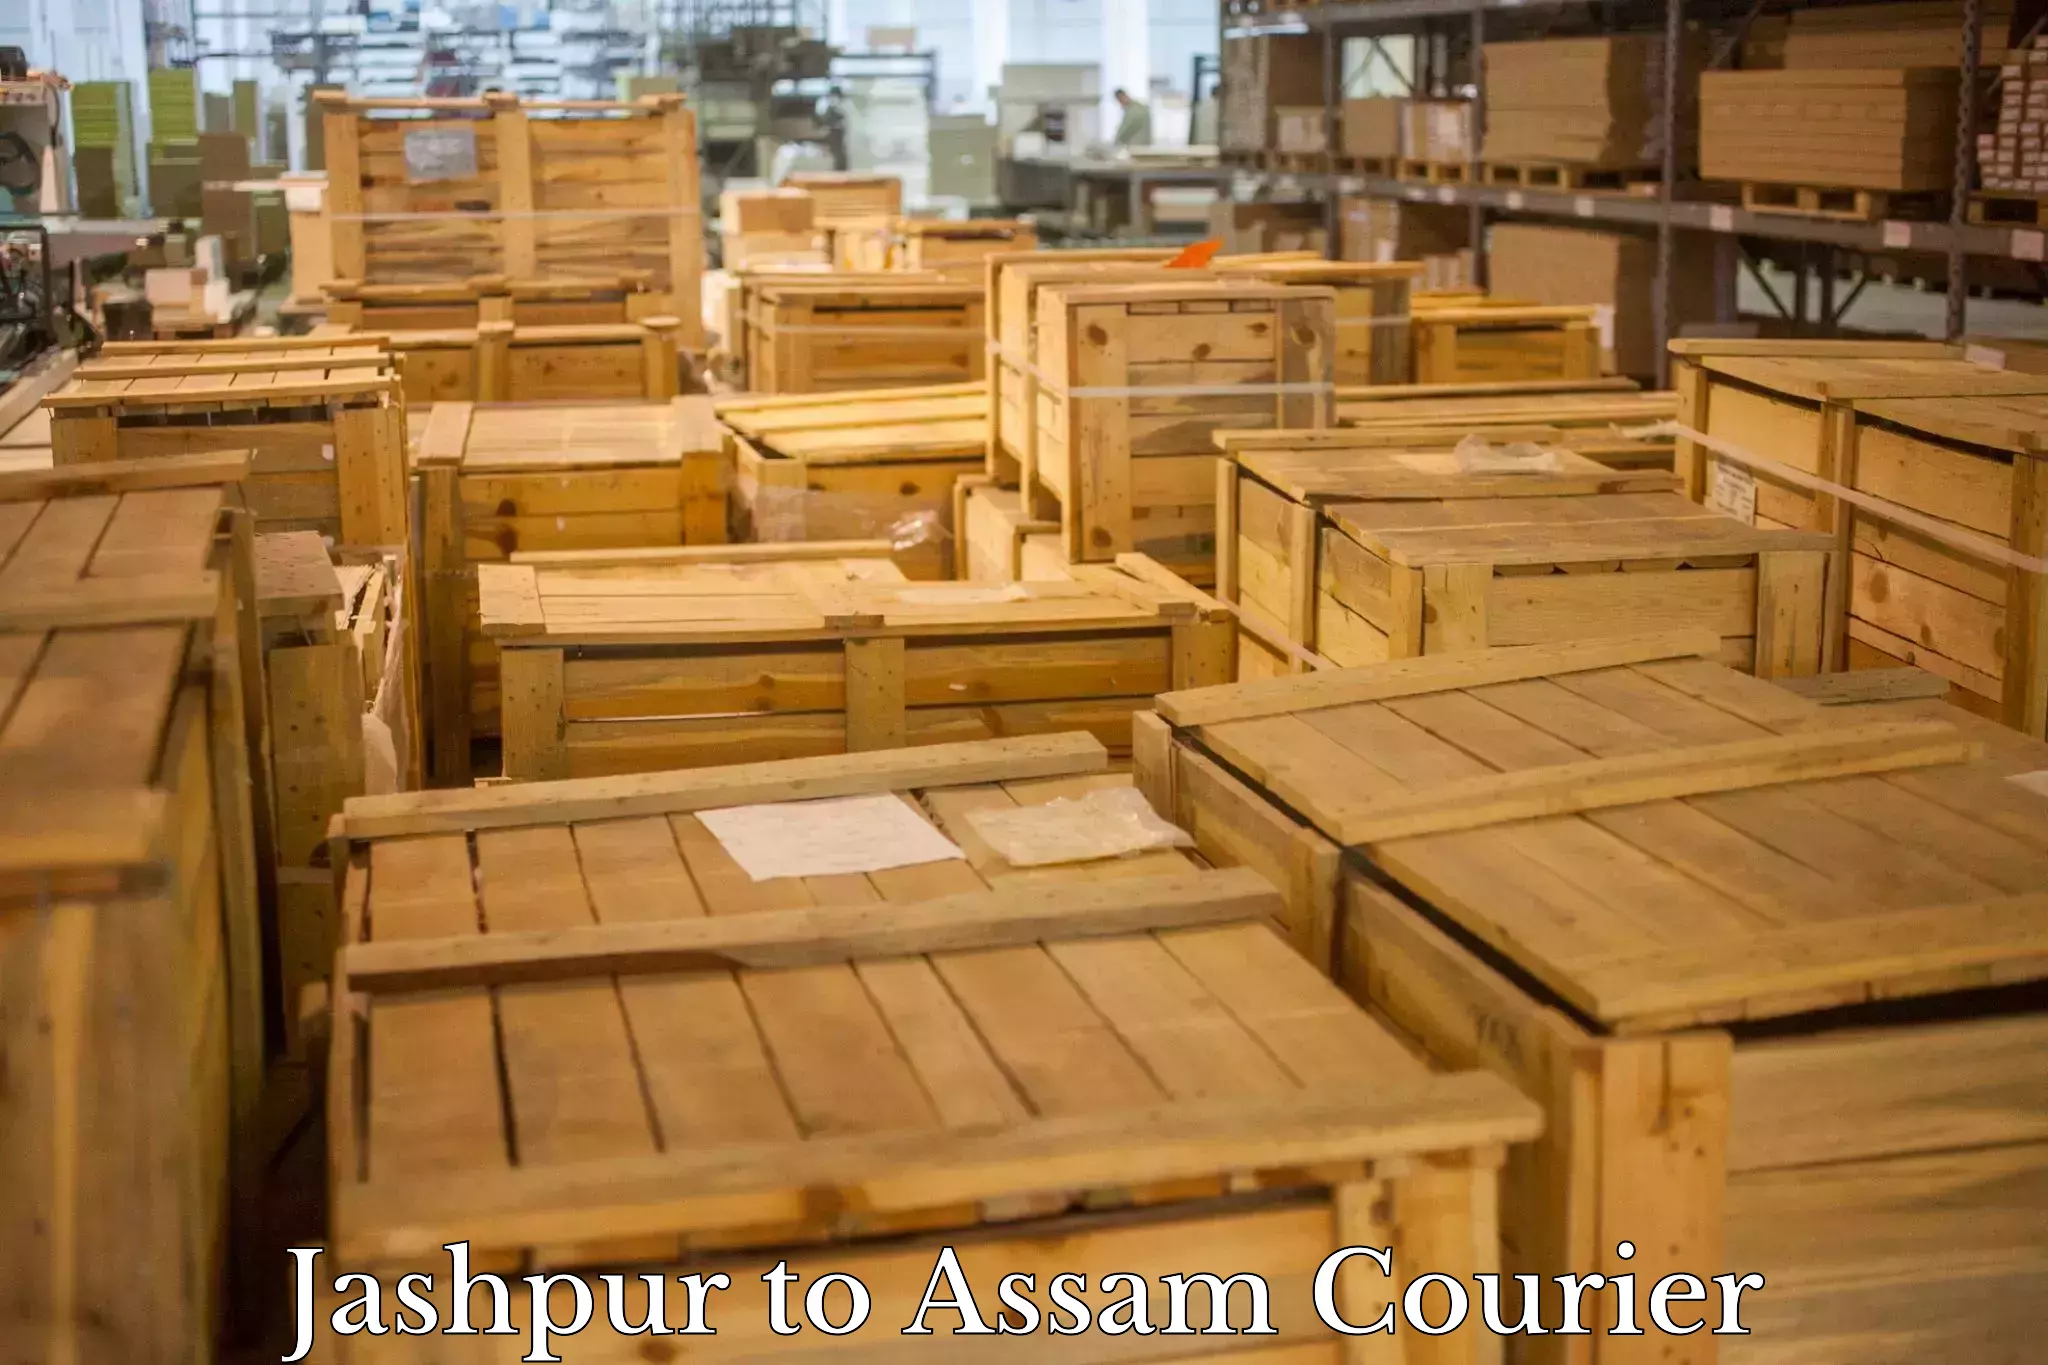 Courier tracking online Jashpur to Rupai Siding